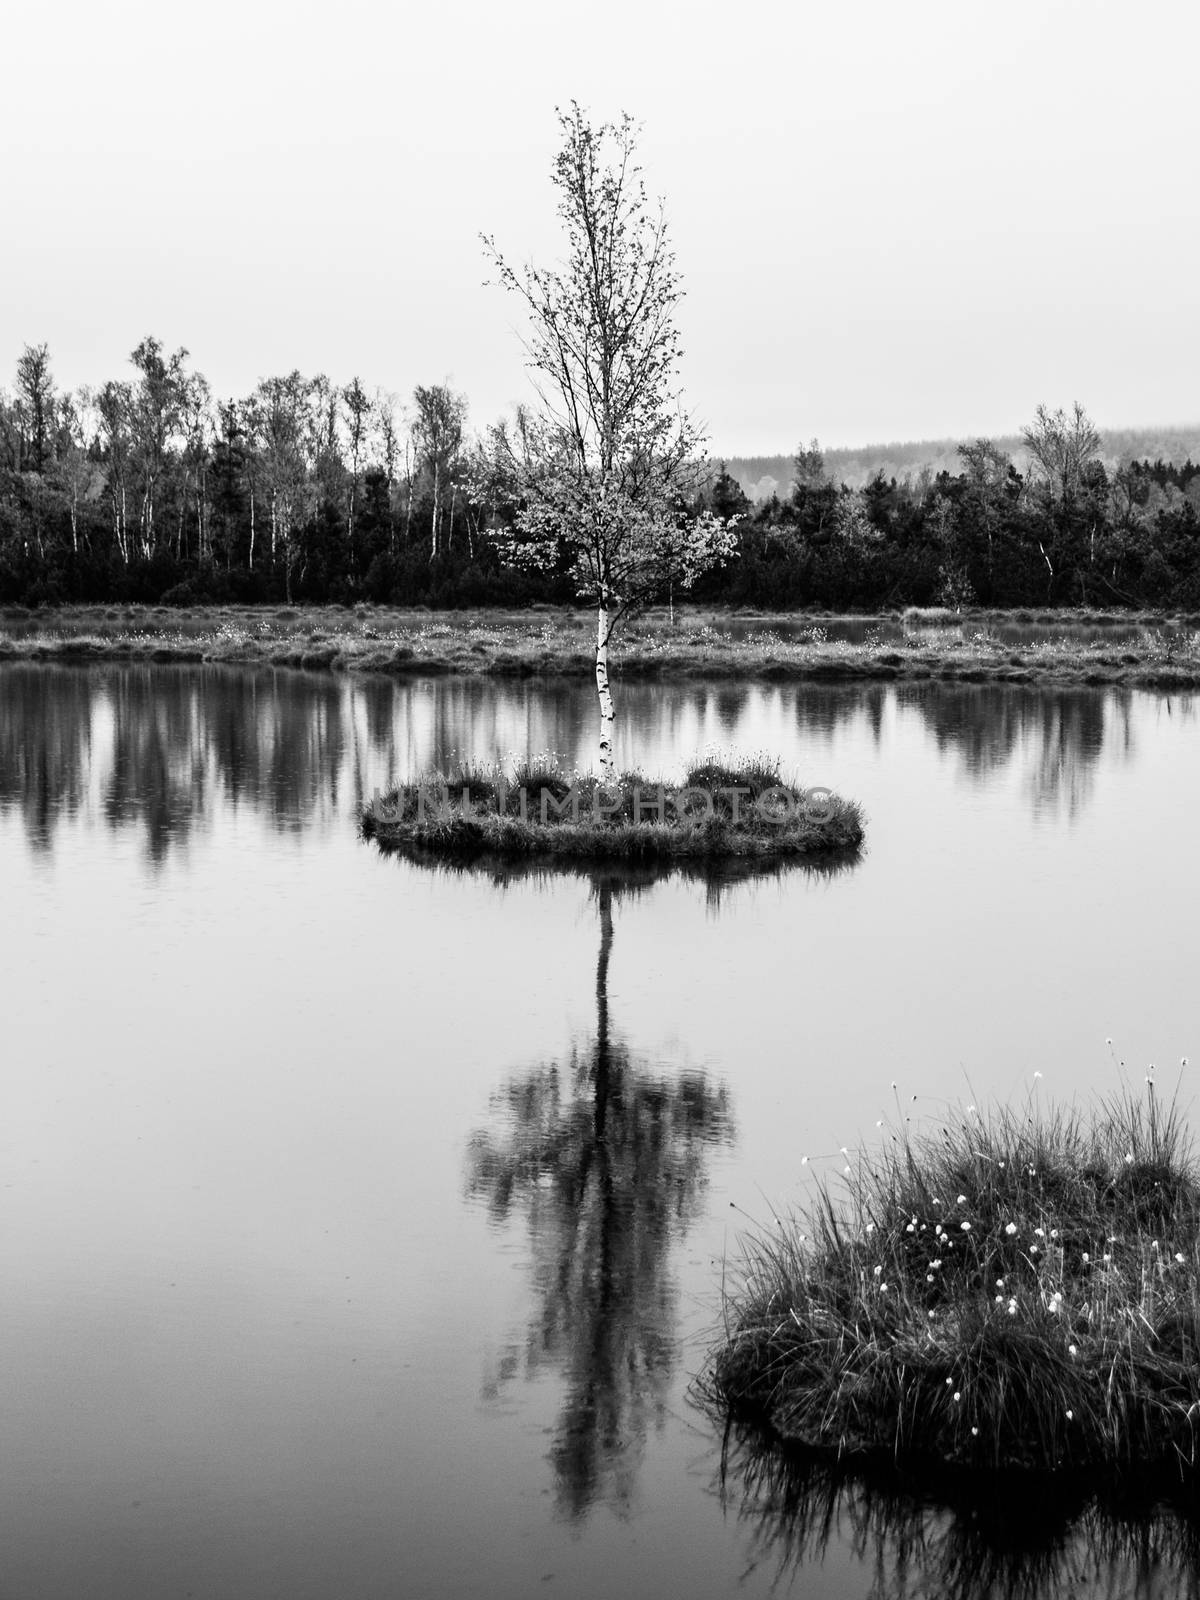 Chalupska Moor Lake near Borova Lada, Sumava Mountains, Czech Republic. Small islands with trees in the middle of peat-bog. Black and white image by pyty